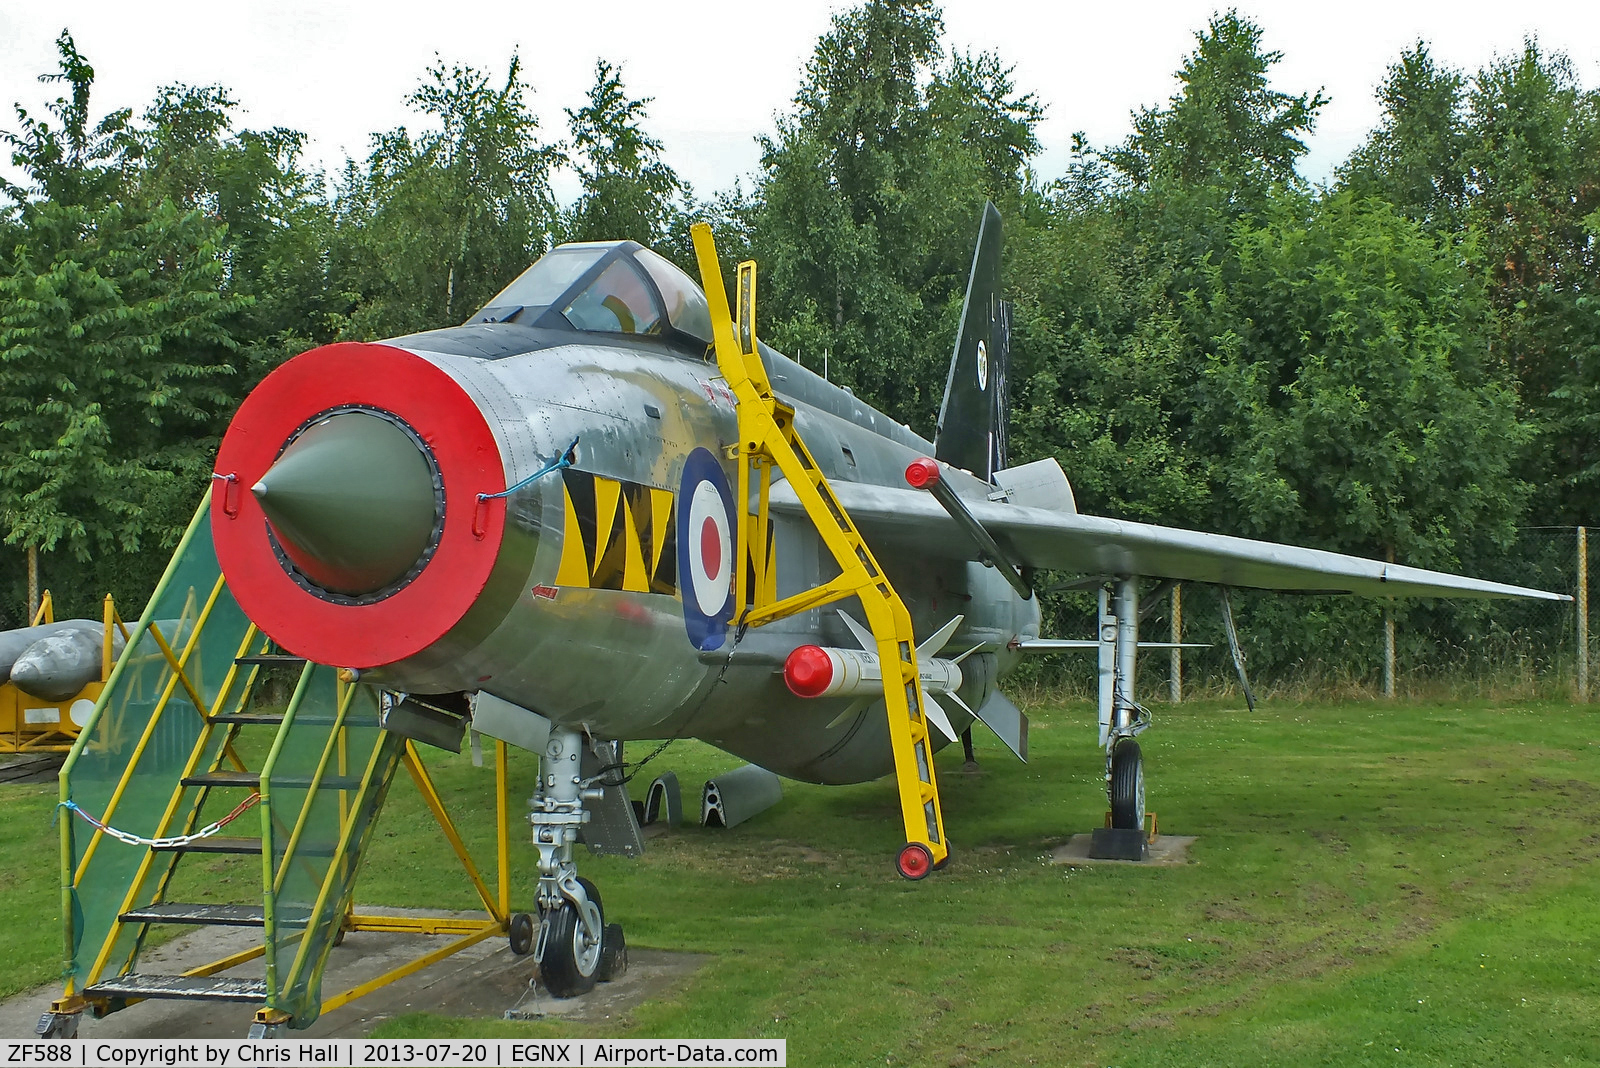 ZF588, English Electric Lightning F.53 C/N 95300, Preserved at the East Midlands Aeropark